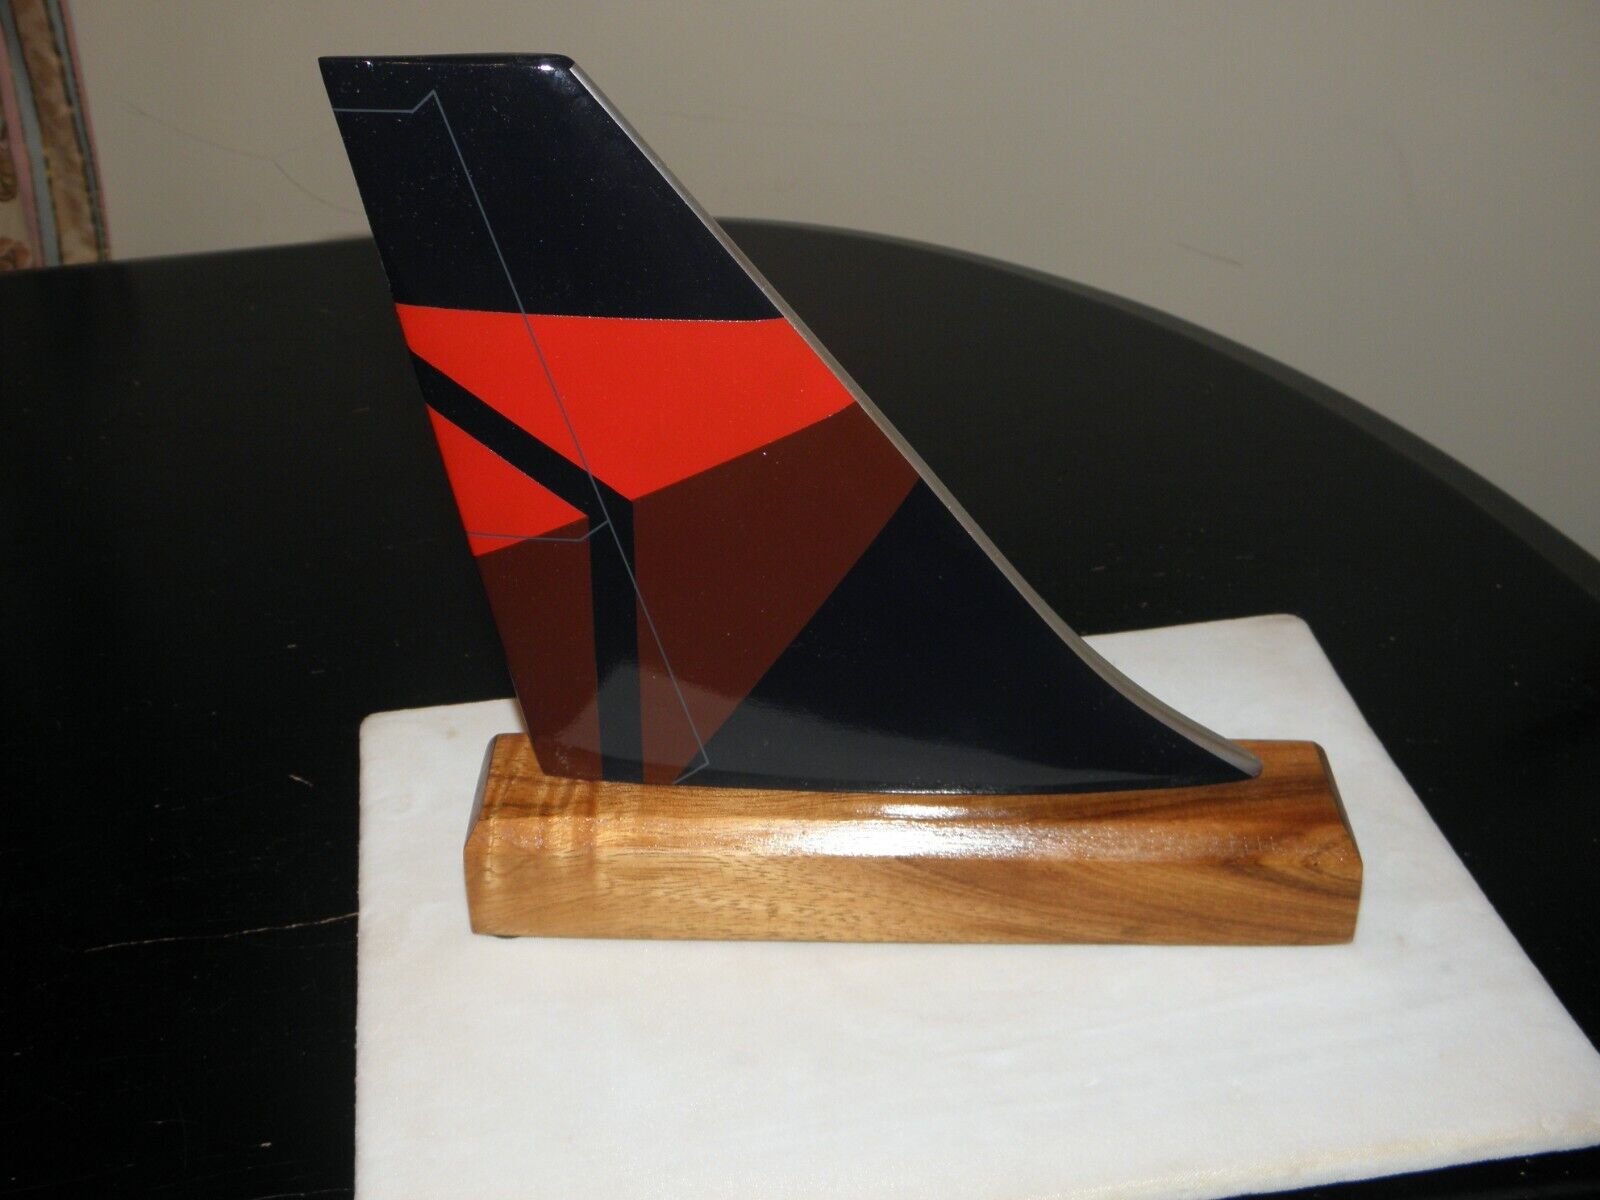 DELTA AIRLINE MODEL AIRPLANE WOOD TAIL NEW COLORS NORTHWEST NWA PILOT DESK GIFT